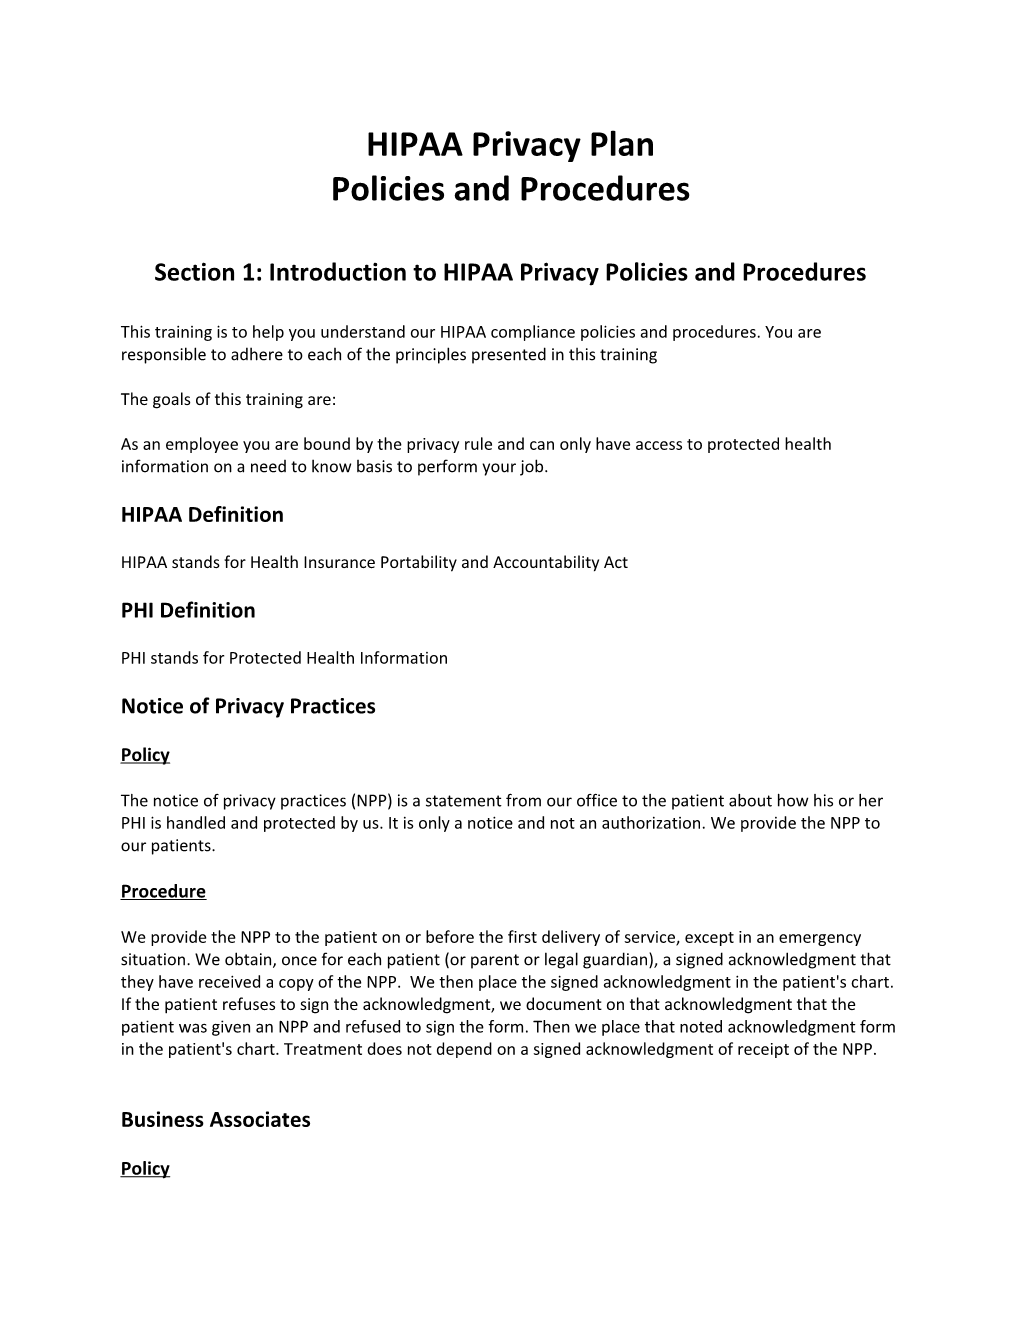 Section 1: Introduction to HIPAA Privacy Policies and Procedures